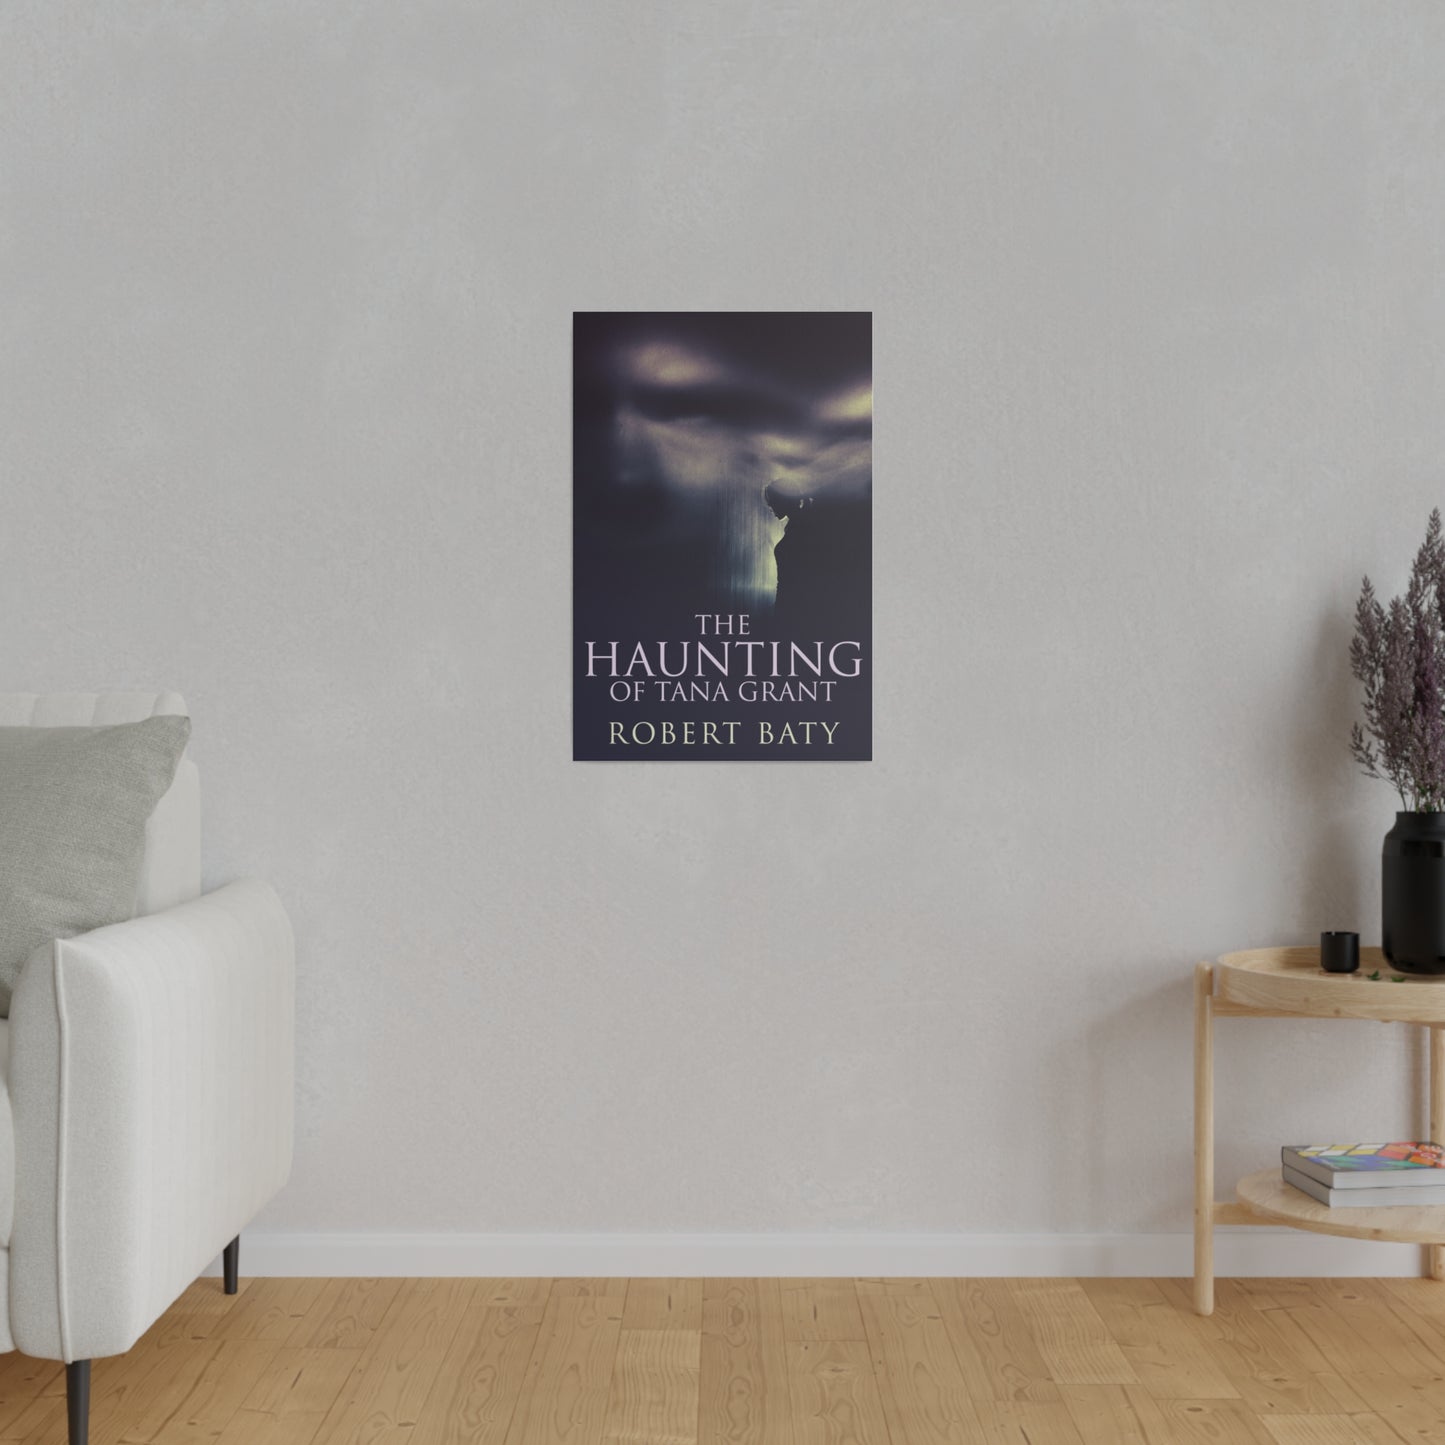 The Haunting Of Tana Grant - Canvas